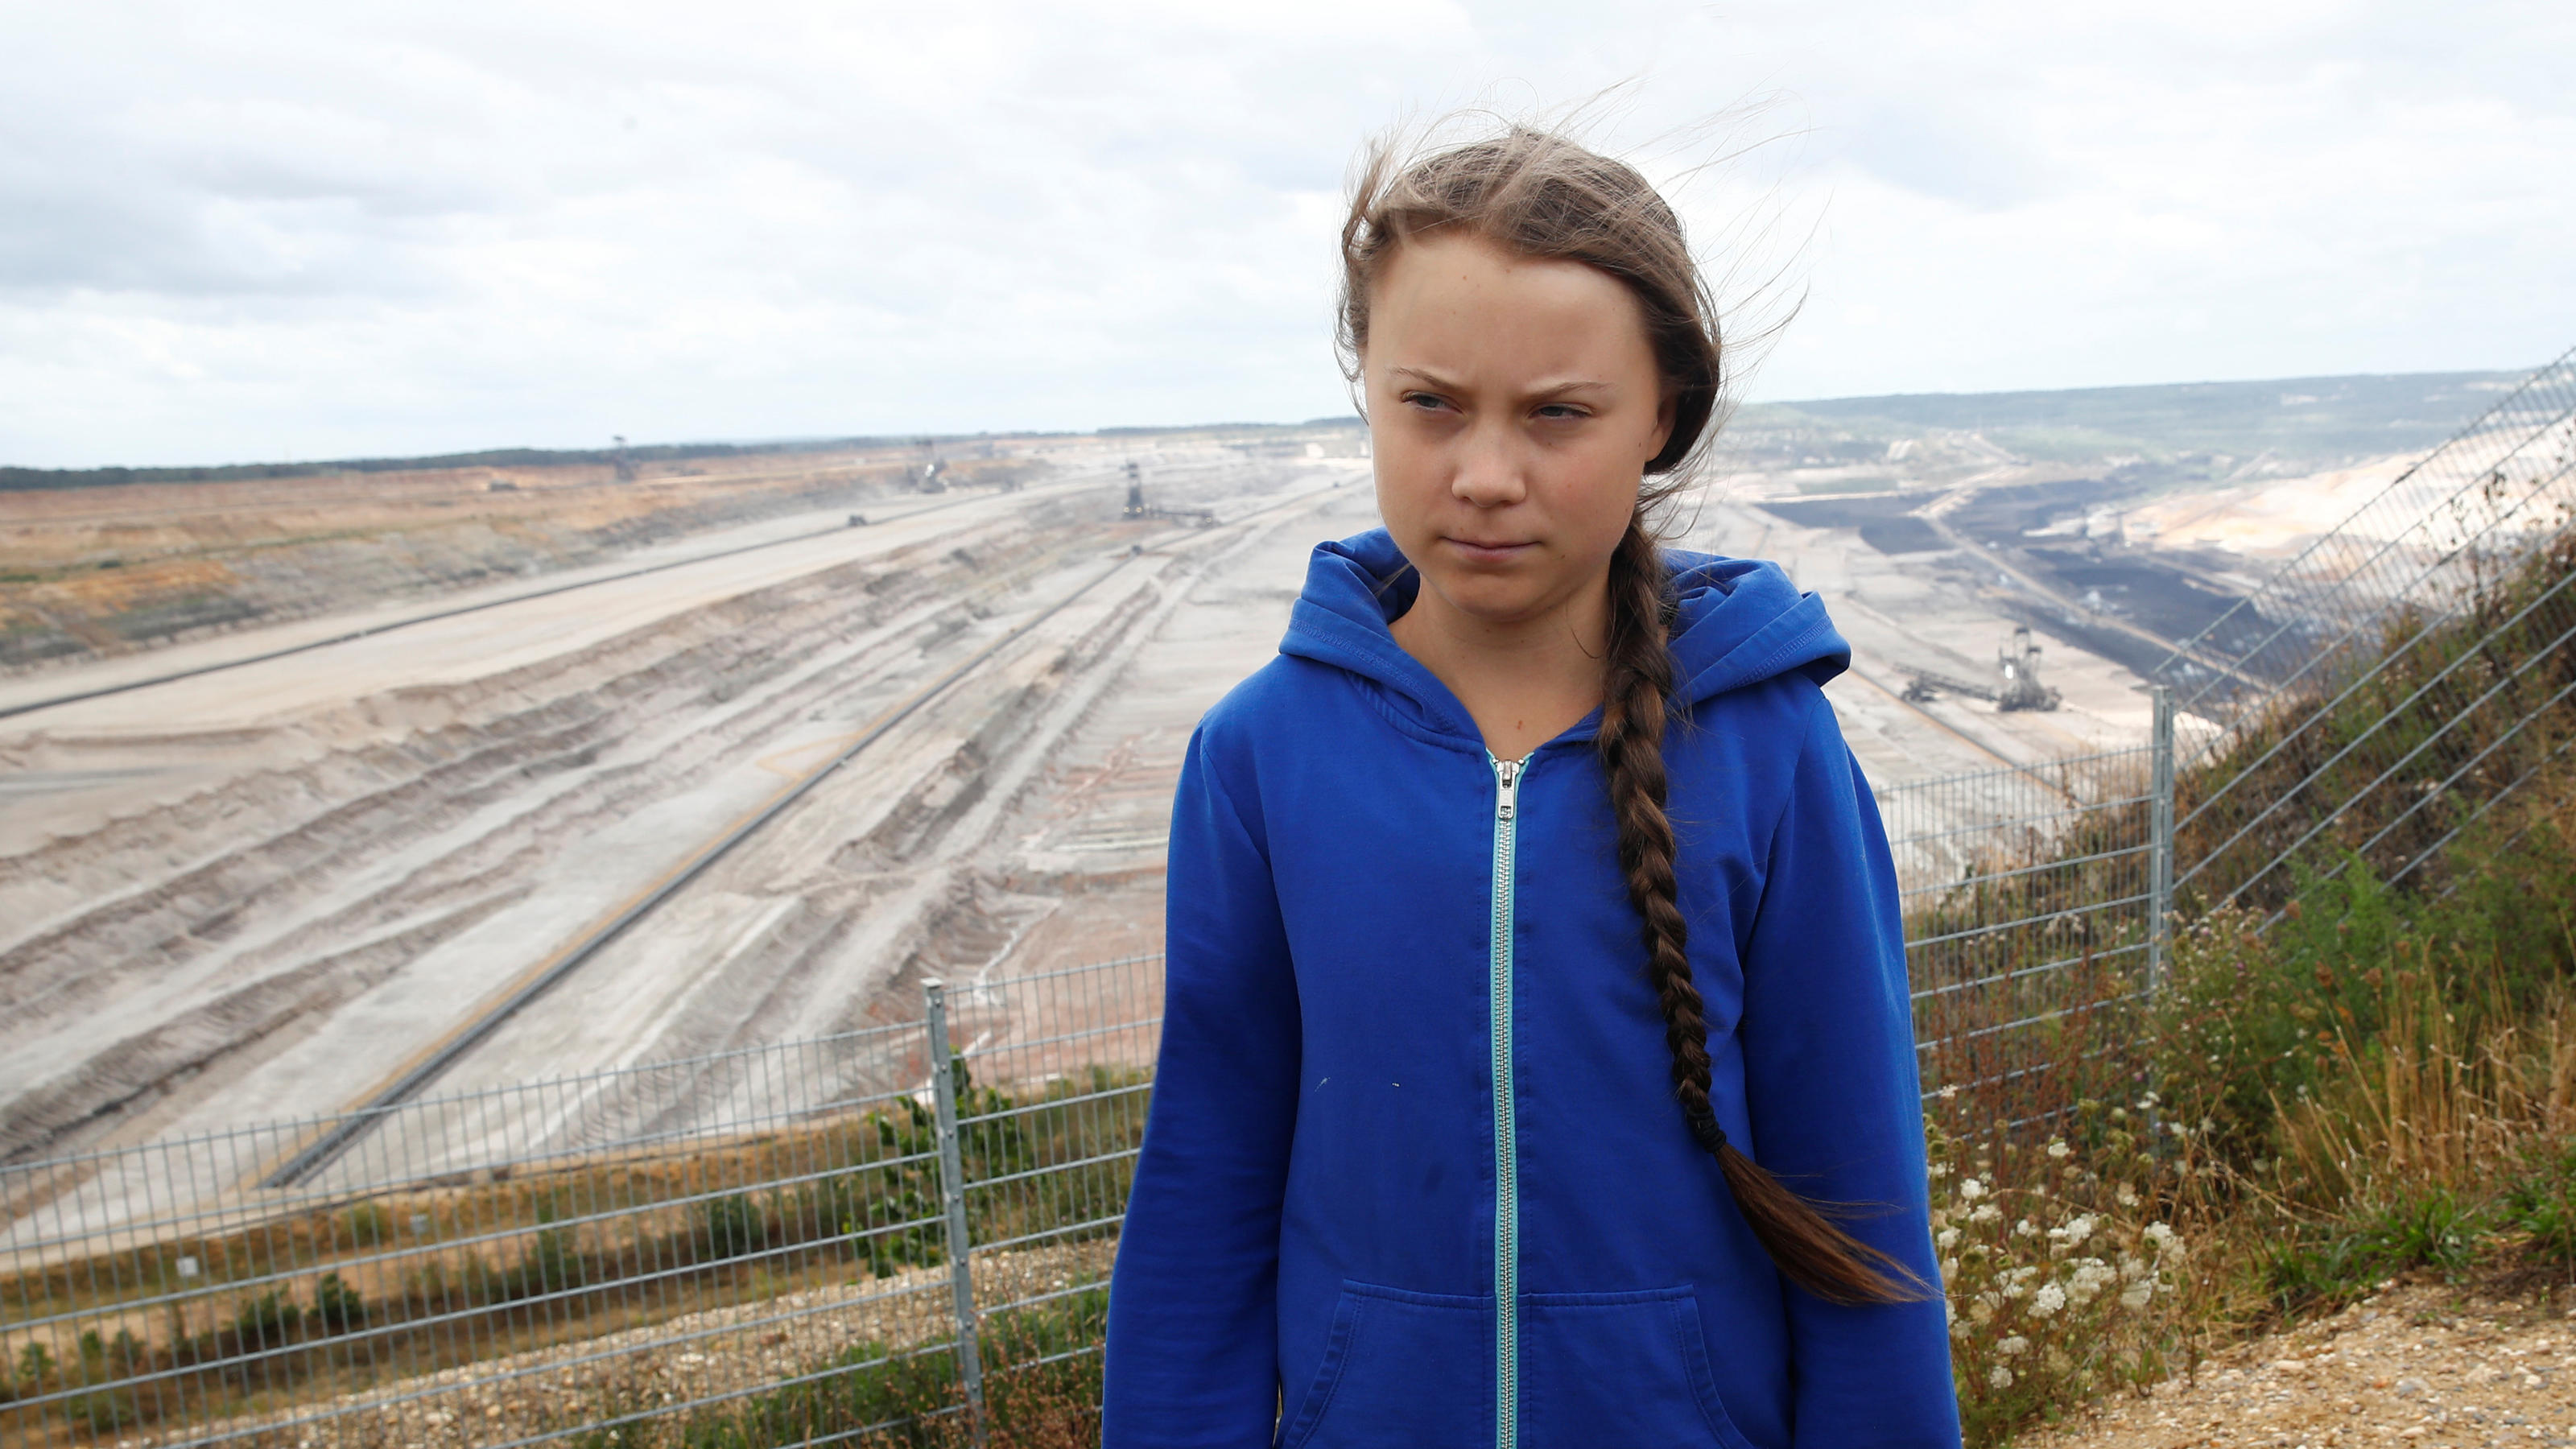 Greta Thunberg, Swedish "Fridays for Future" climate activist, stands at the edge of the Hambach open-cast brown coal mine of German utility RWE, west of Cologne, Germany, August 10, 2019.   REUTERS/Wolfgang Rattay